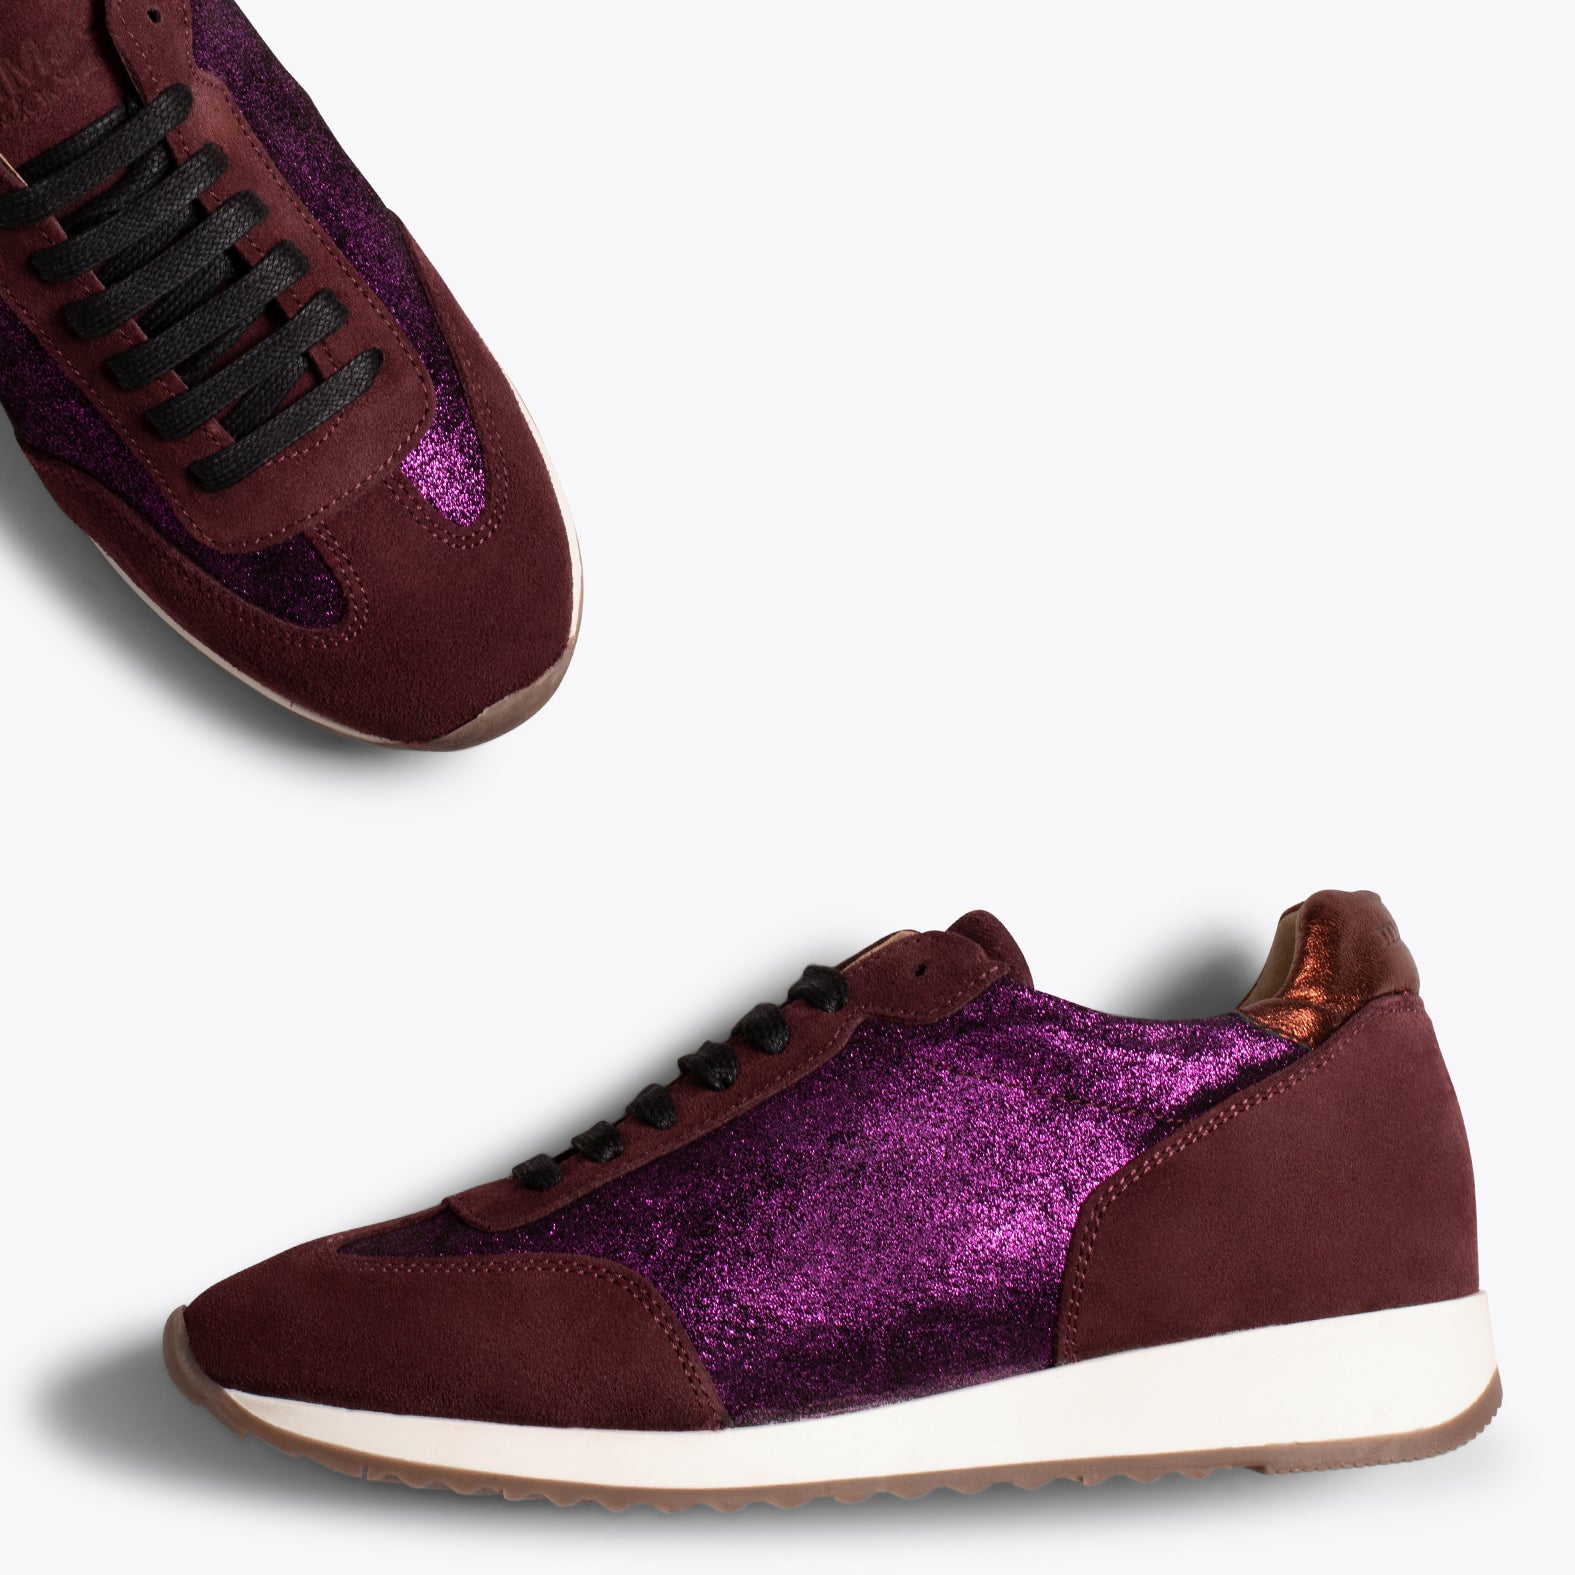 CASUAL – BURGUNDY sneaker with metallic leather detail